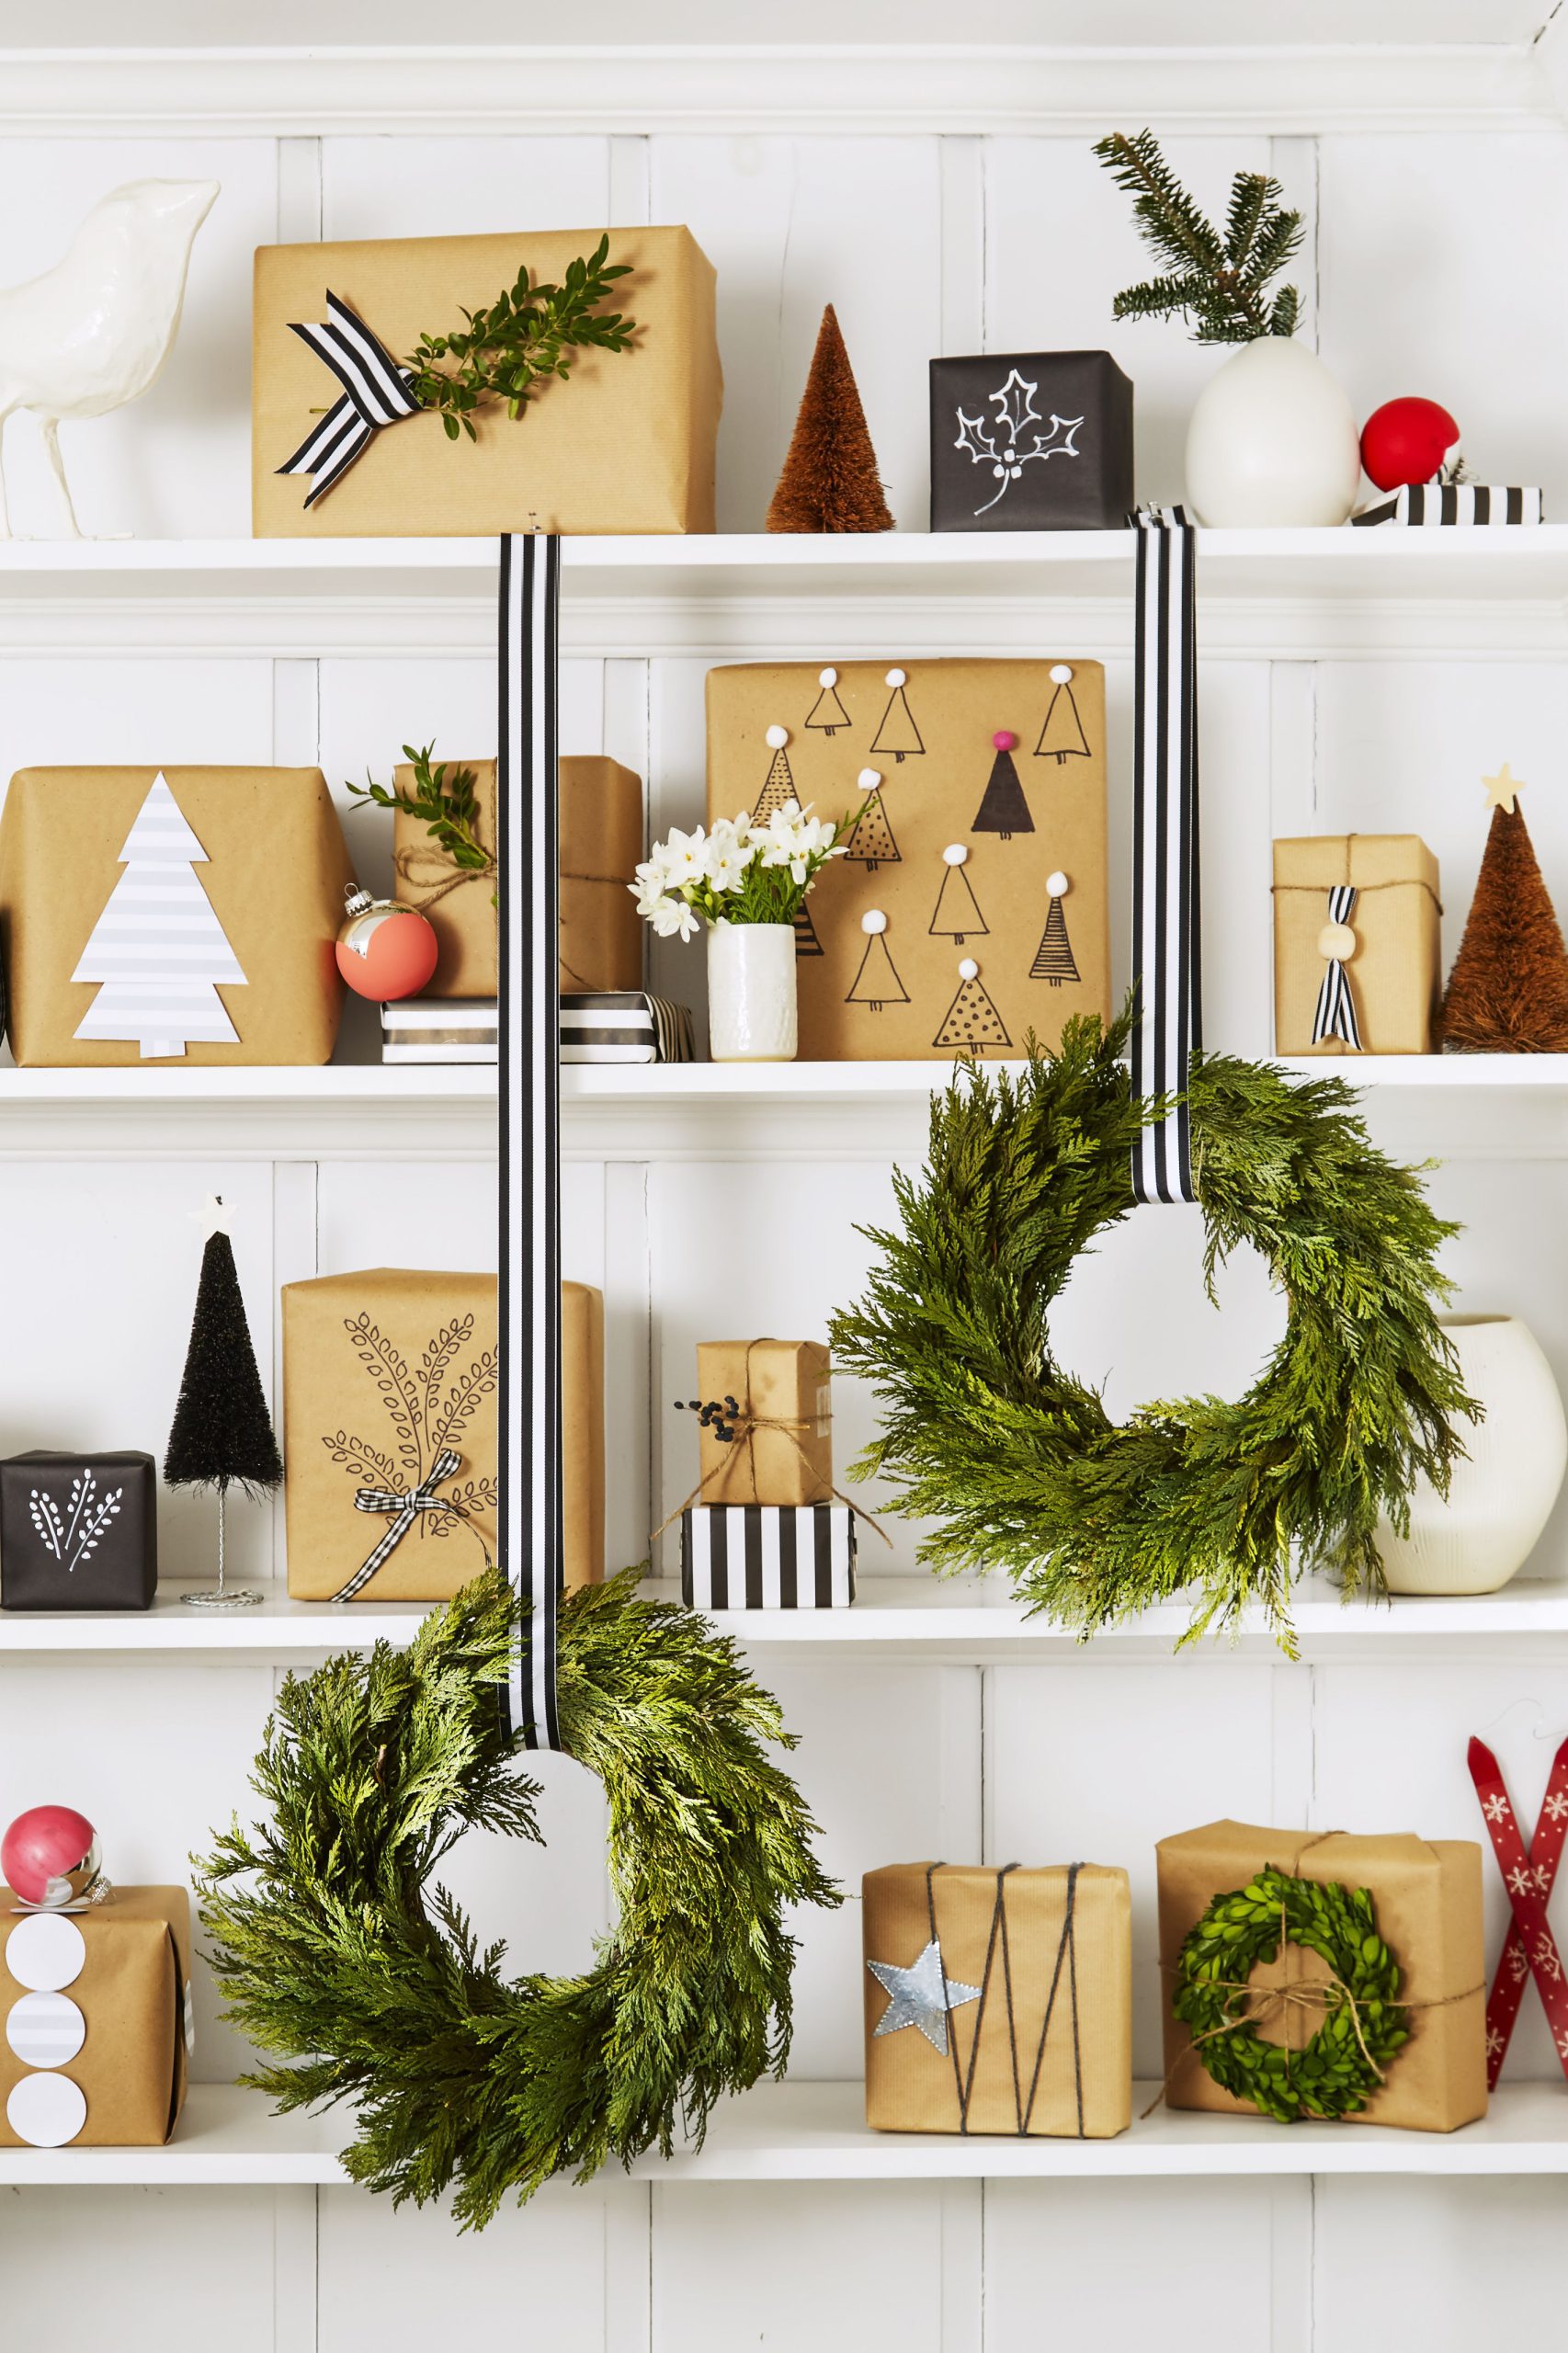 Decorate Your Bookshelf in Christmas Style